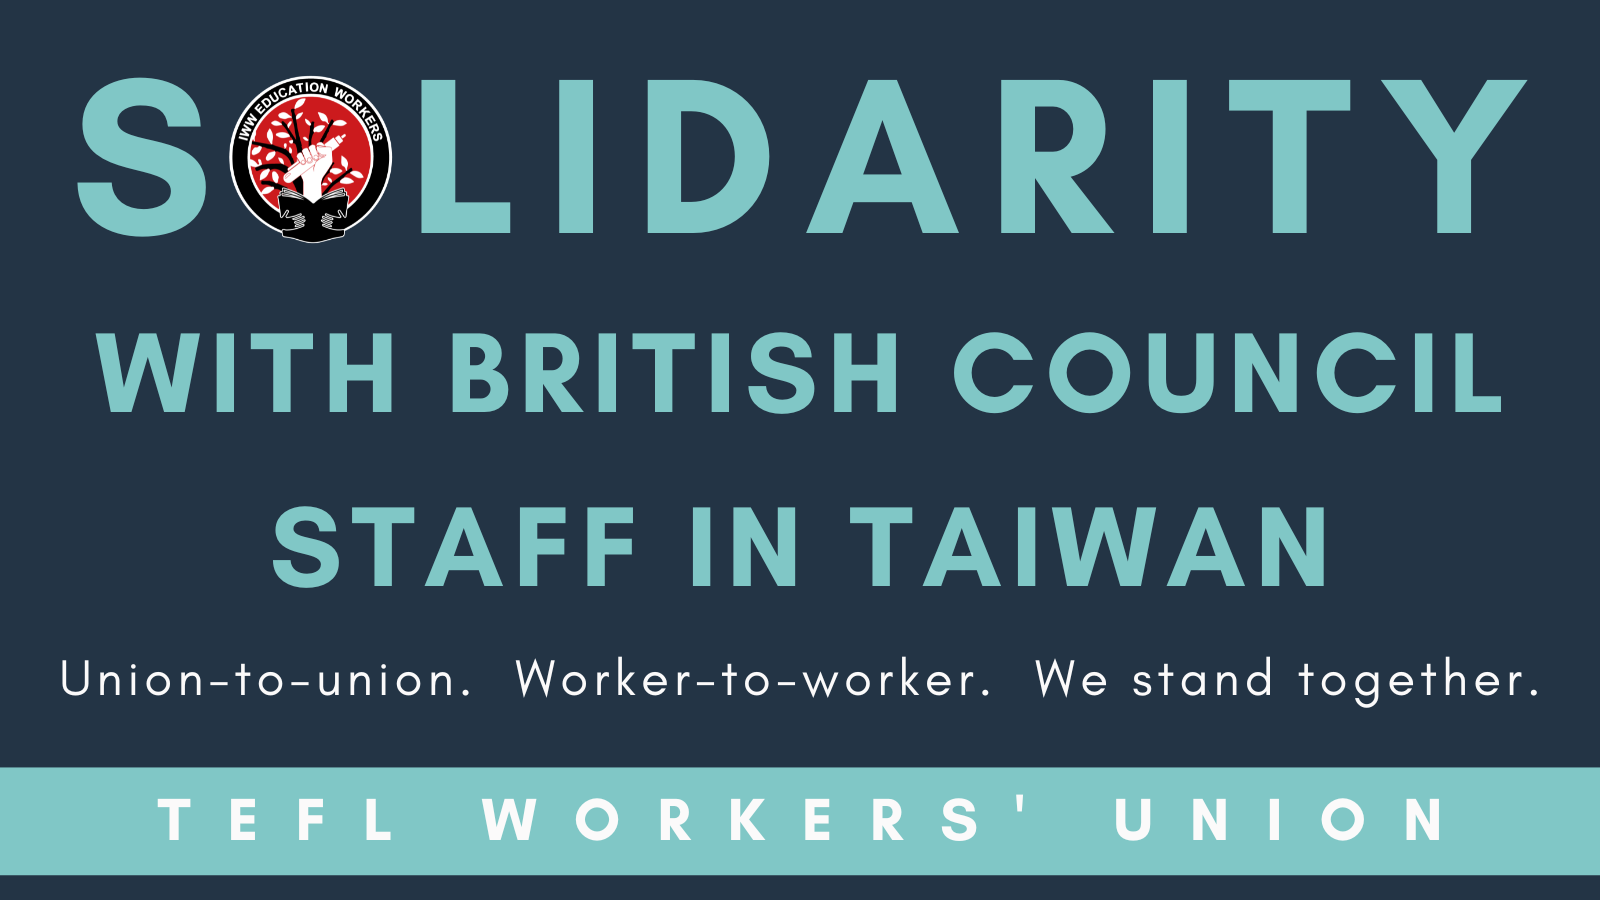 Image reads: Solidarity with British Council Staff in Taiwan